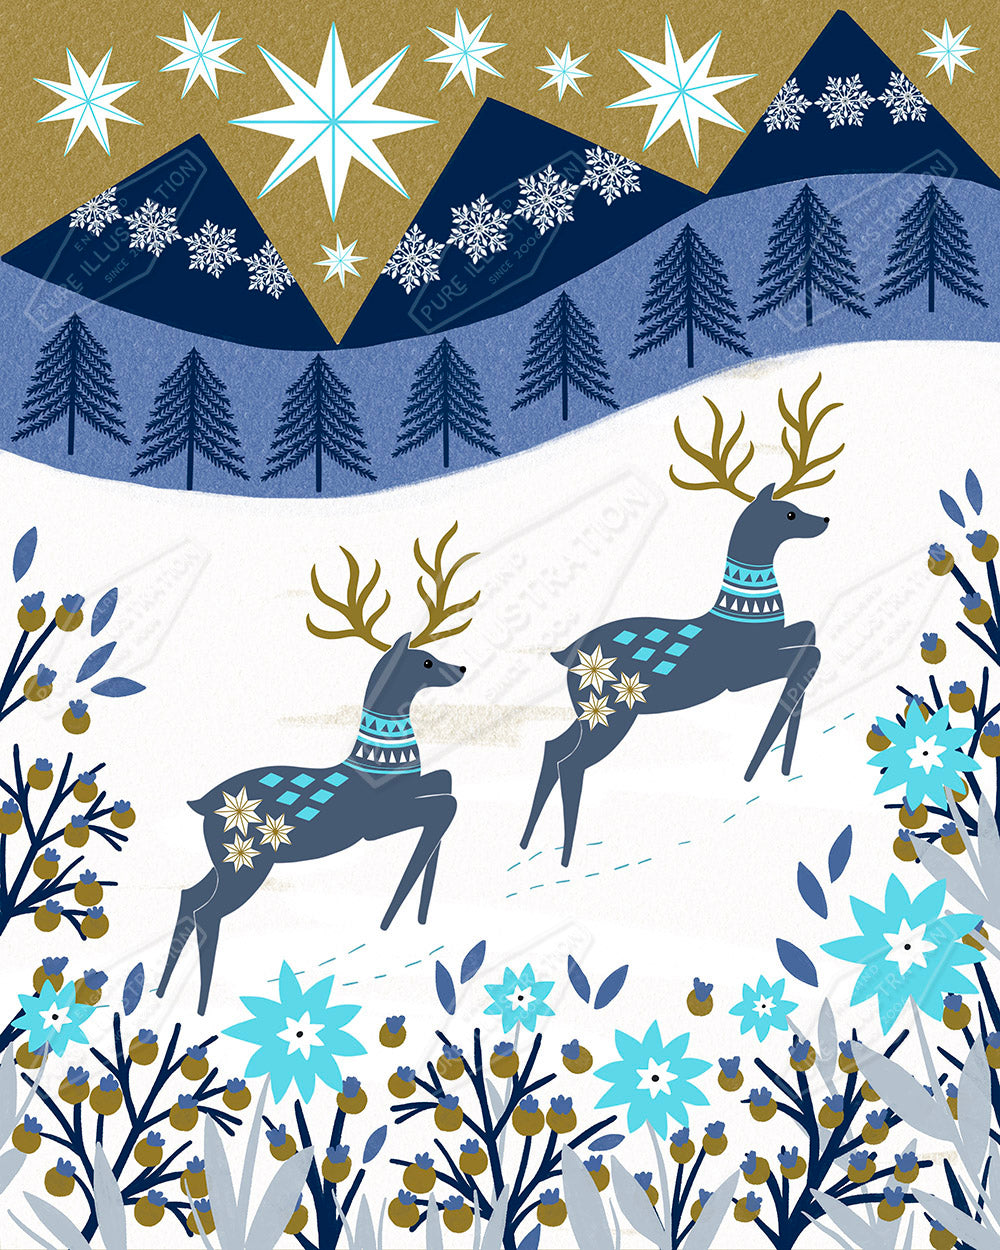 Country Deer Christmas Illustration by Sian Summerhayes for Pure Art Licensing & Surface Design Agency